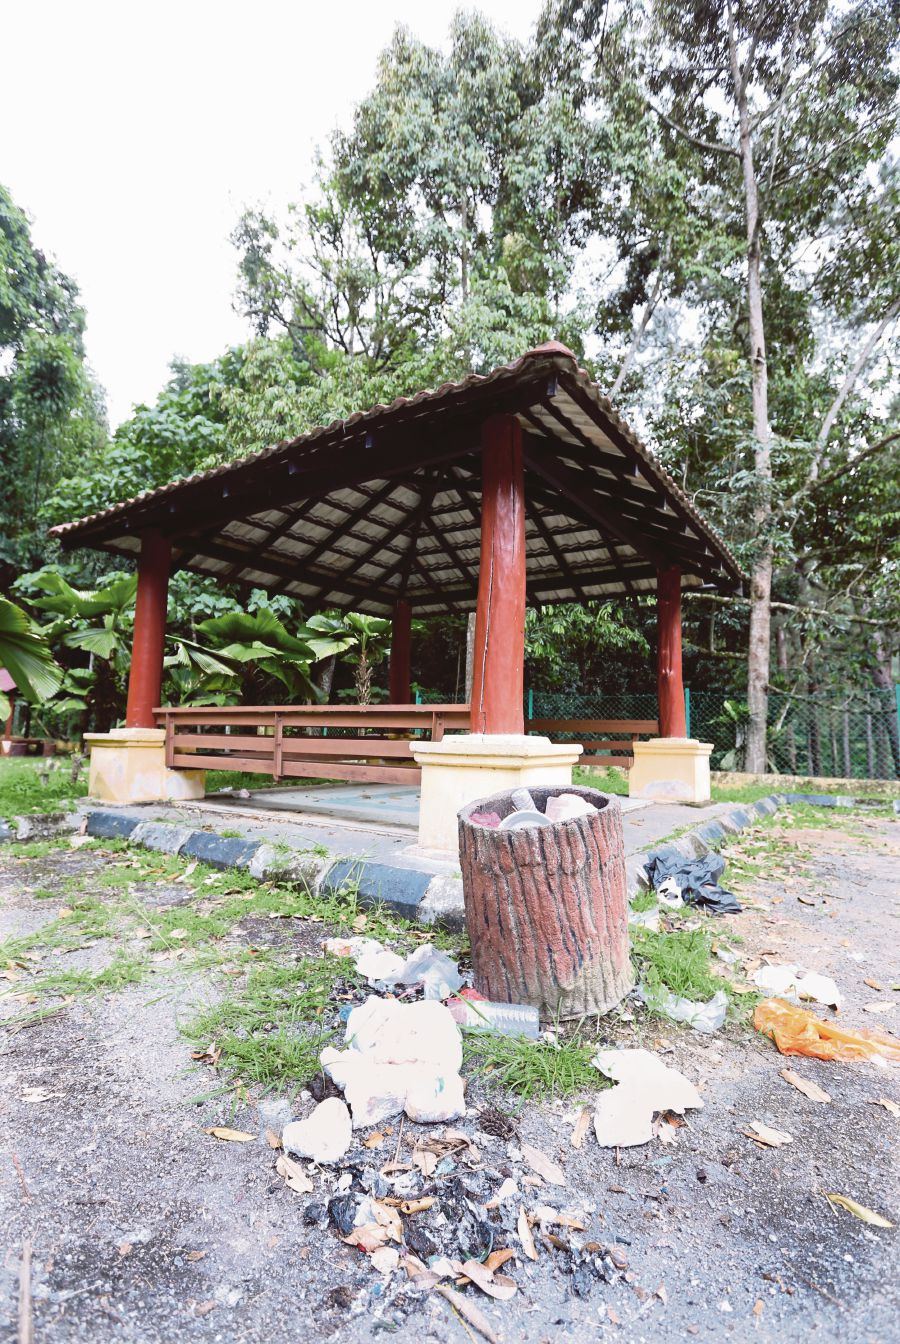  Rubbish at the Coniferous Forest Park in Bukit Tinggi, Pahang. Pix by Rosela Ismail